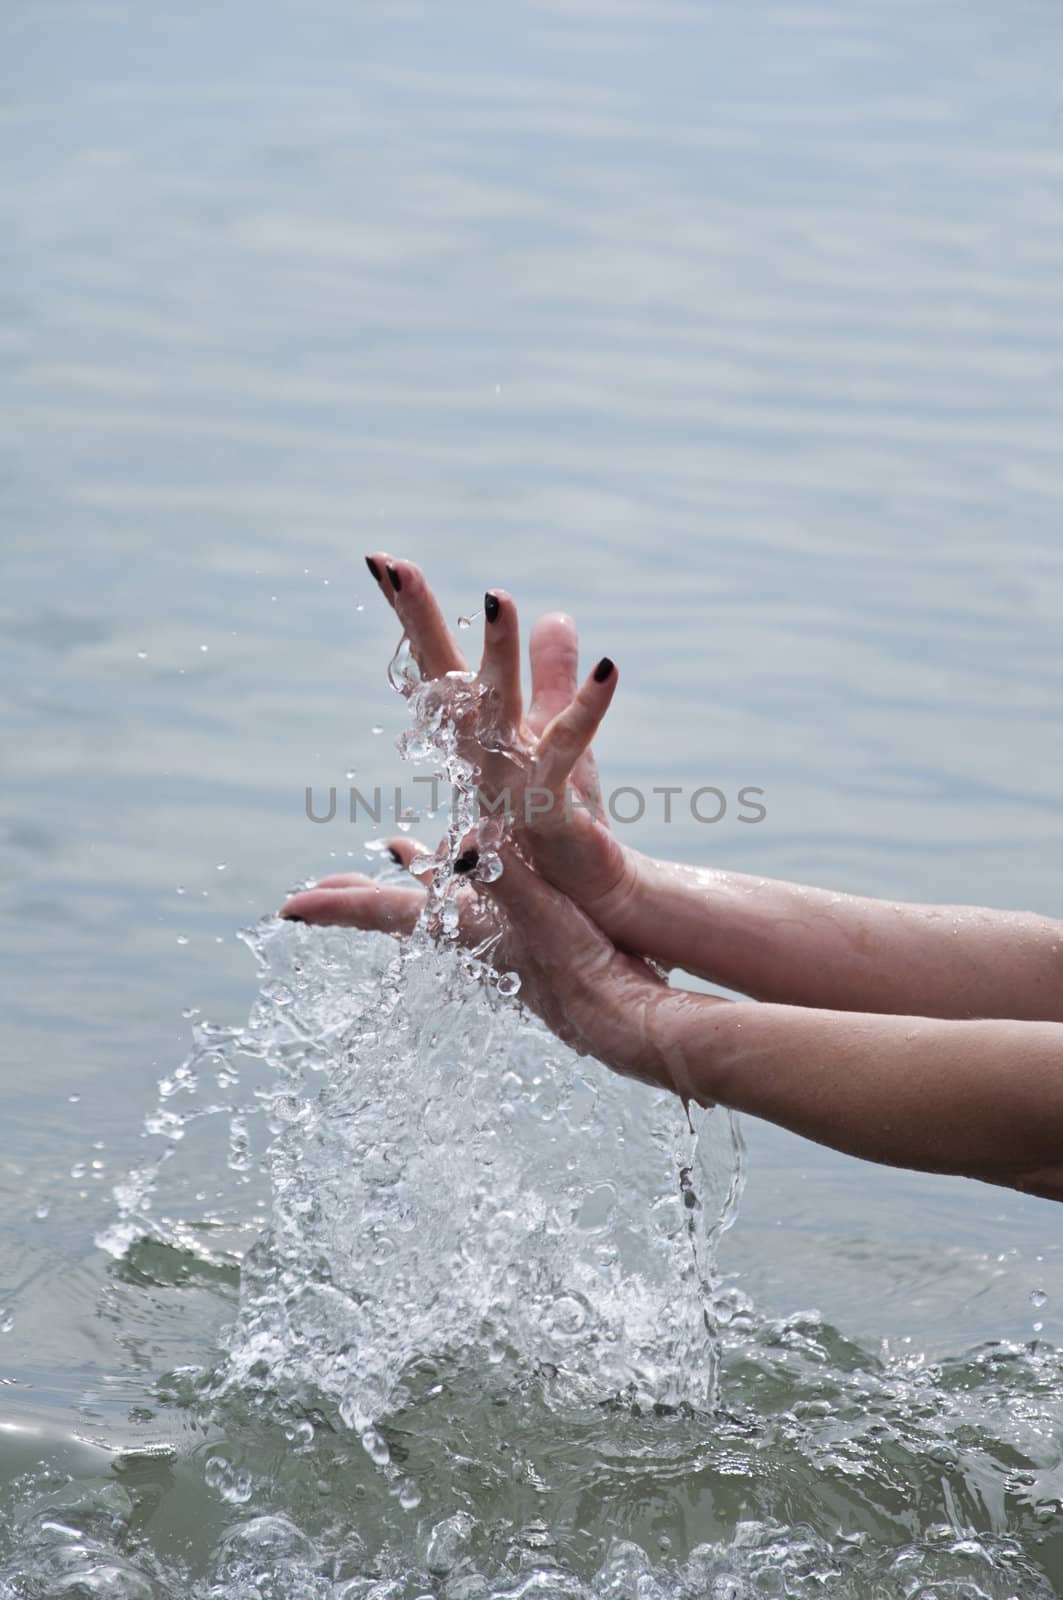 Women's hand with a spray of water